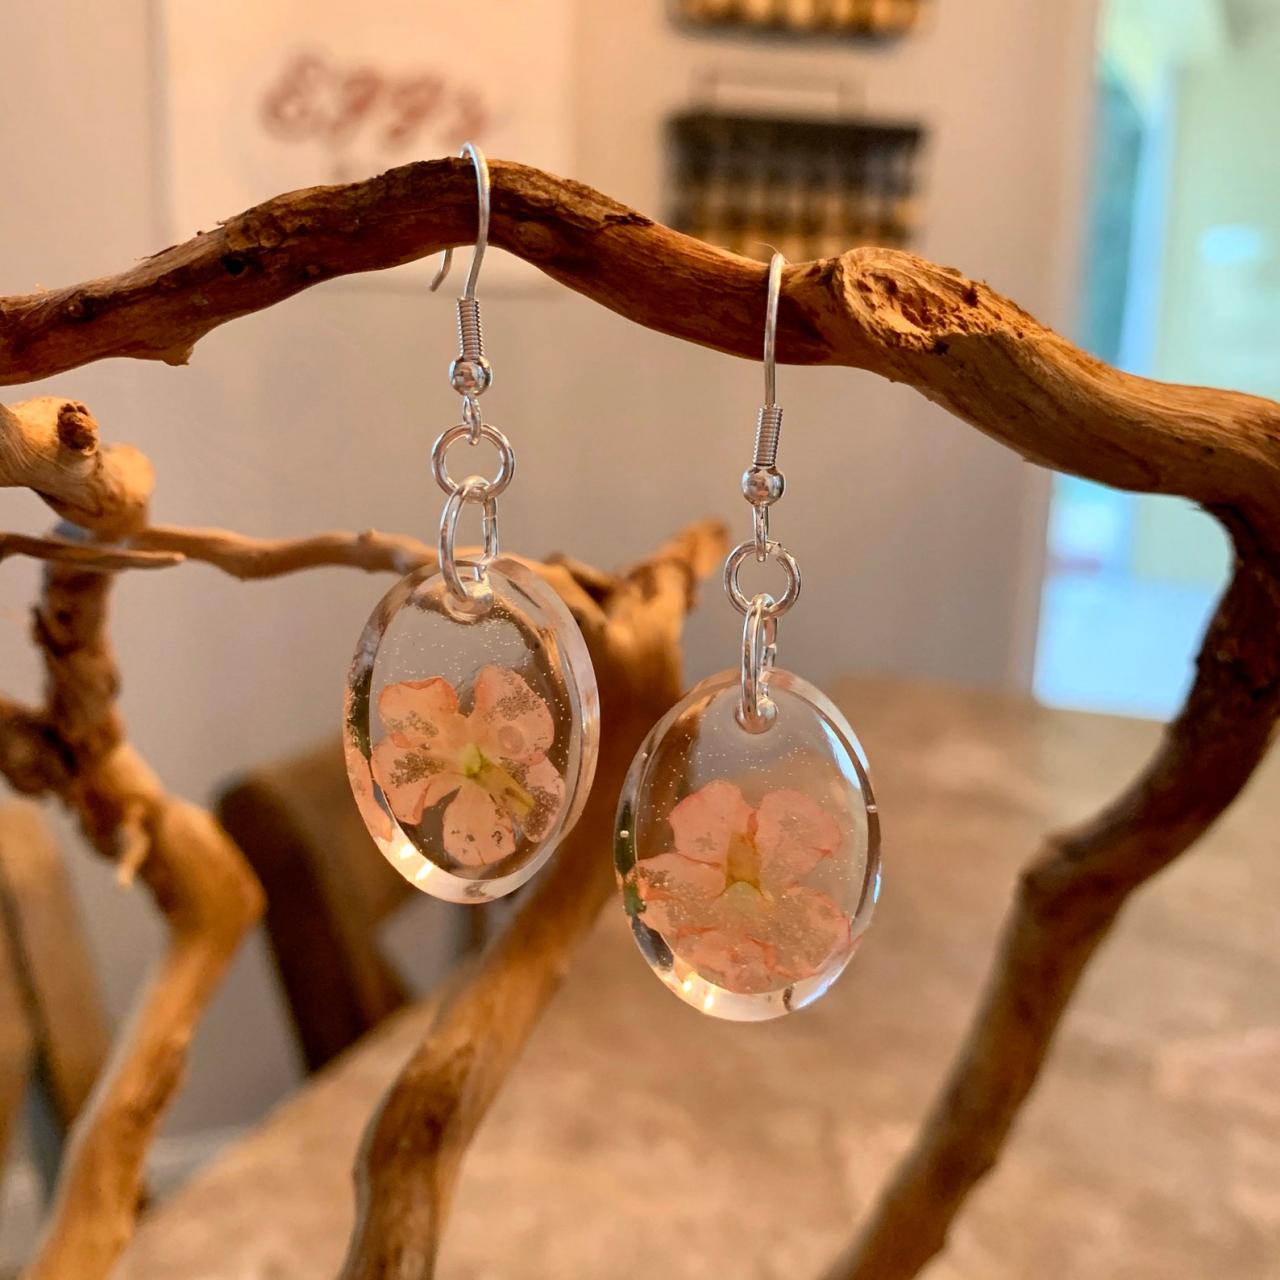 Pink Pressed Dried Flowers Earrings, Resin Flower Jewelry,gift For Graduation, Preserved Flowers, Boho, Minimalist Jewelry Gifts, Nature Gift,